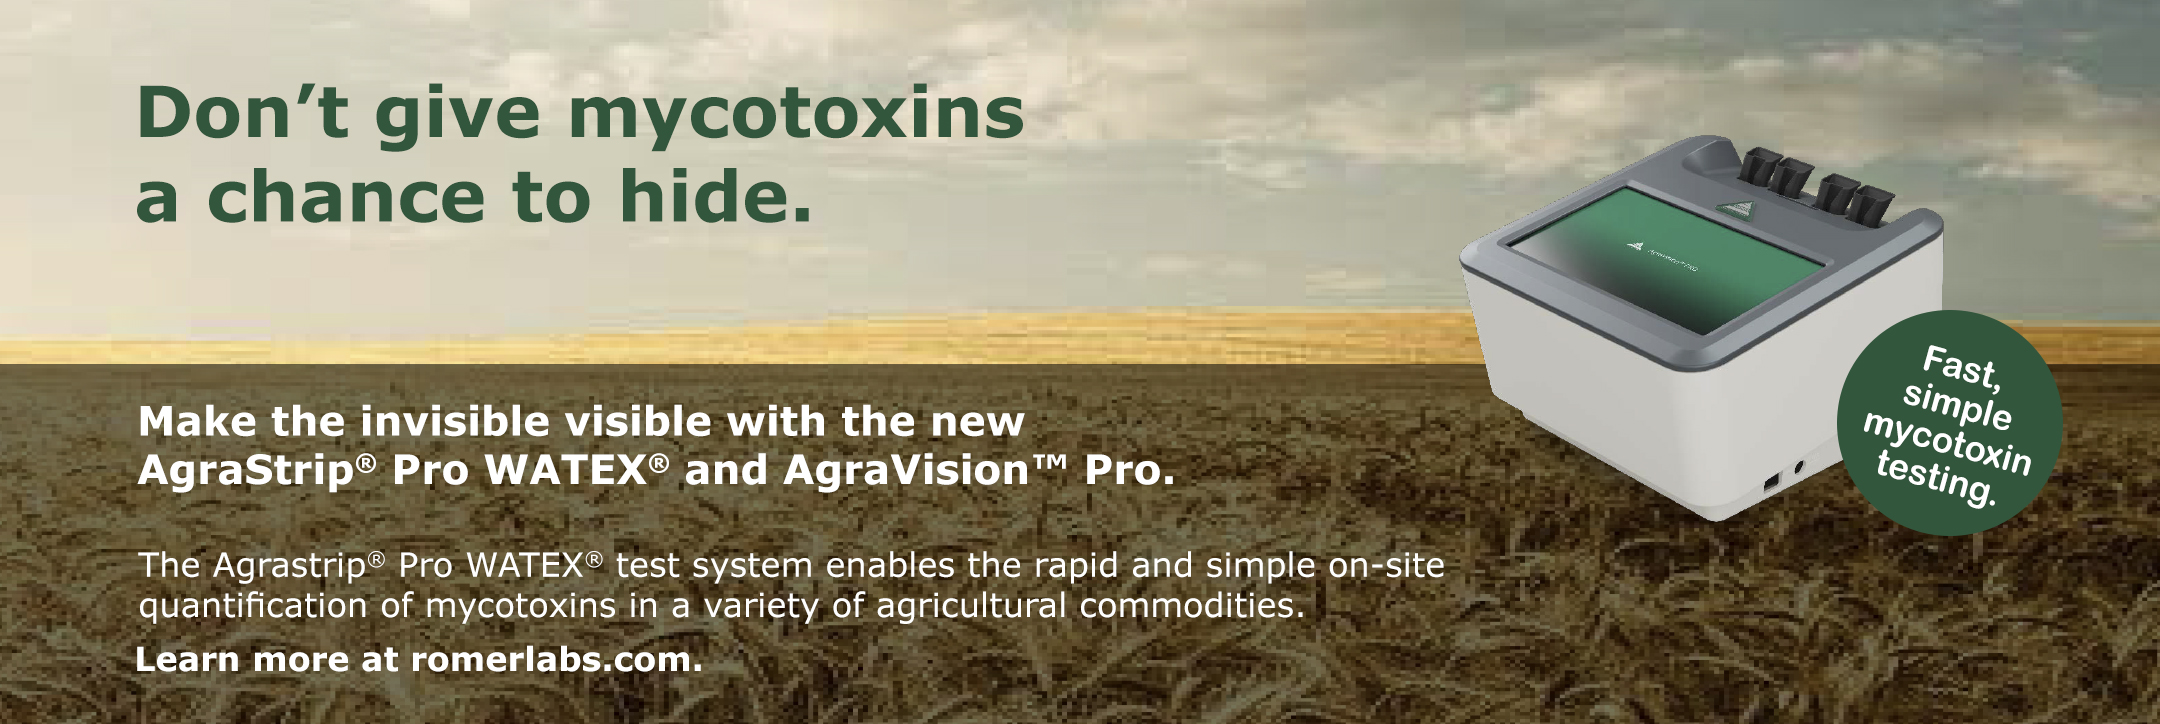 Introducing the AgraStrip® Pro WATEX® test system for the rapid, simple on-site quantification of #mycotoxins.